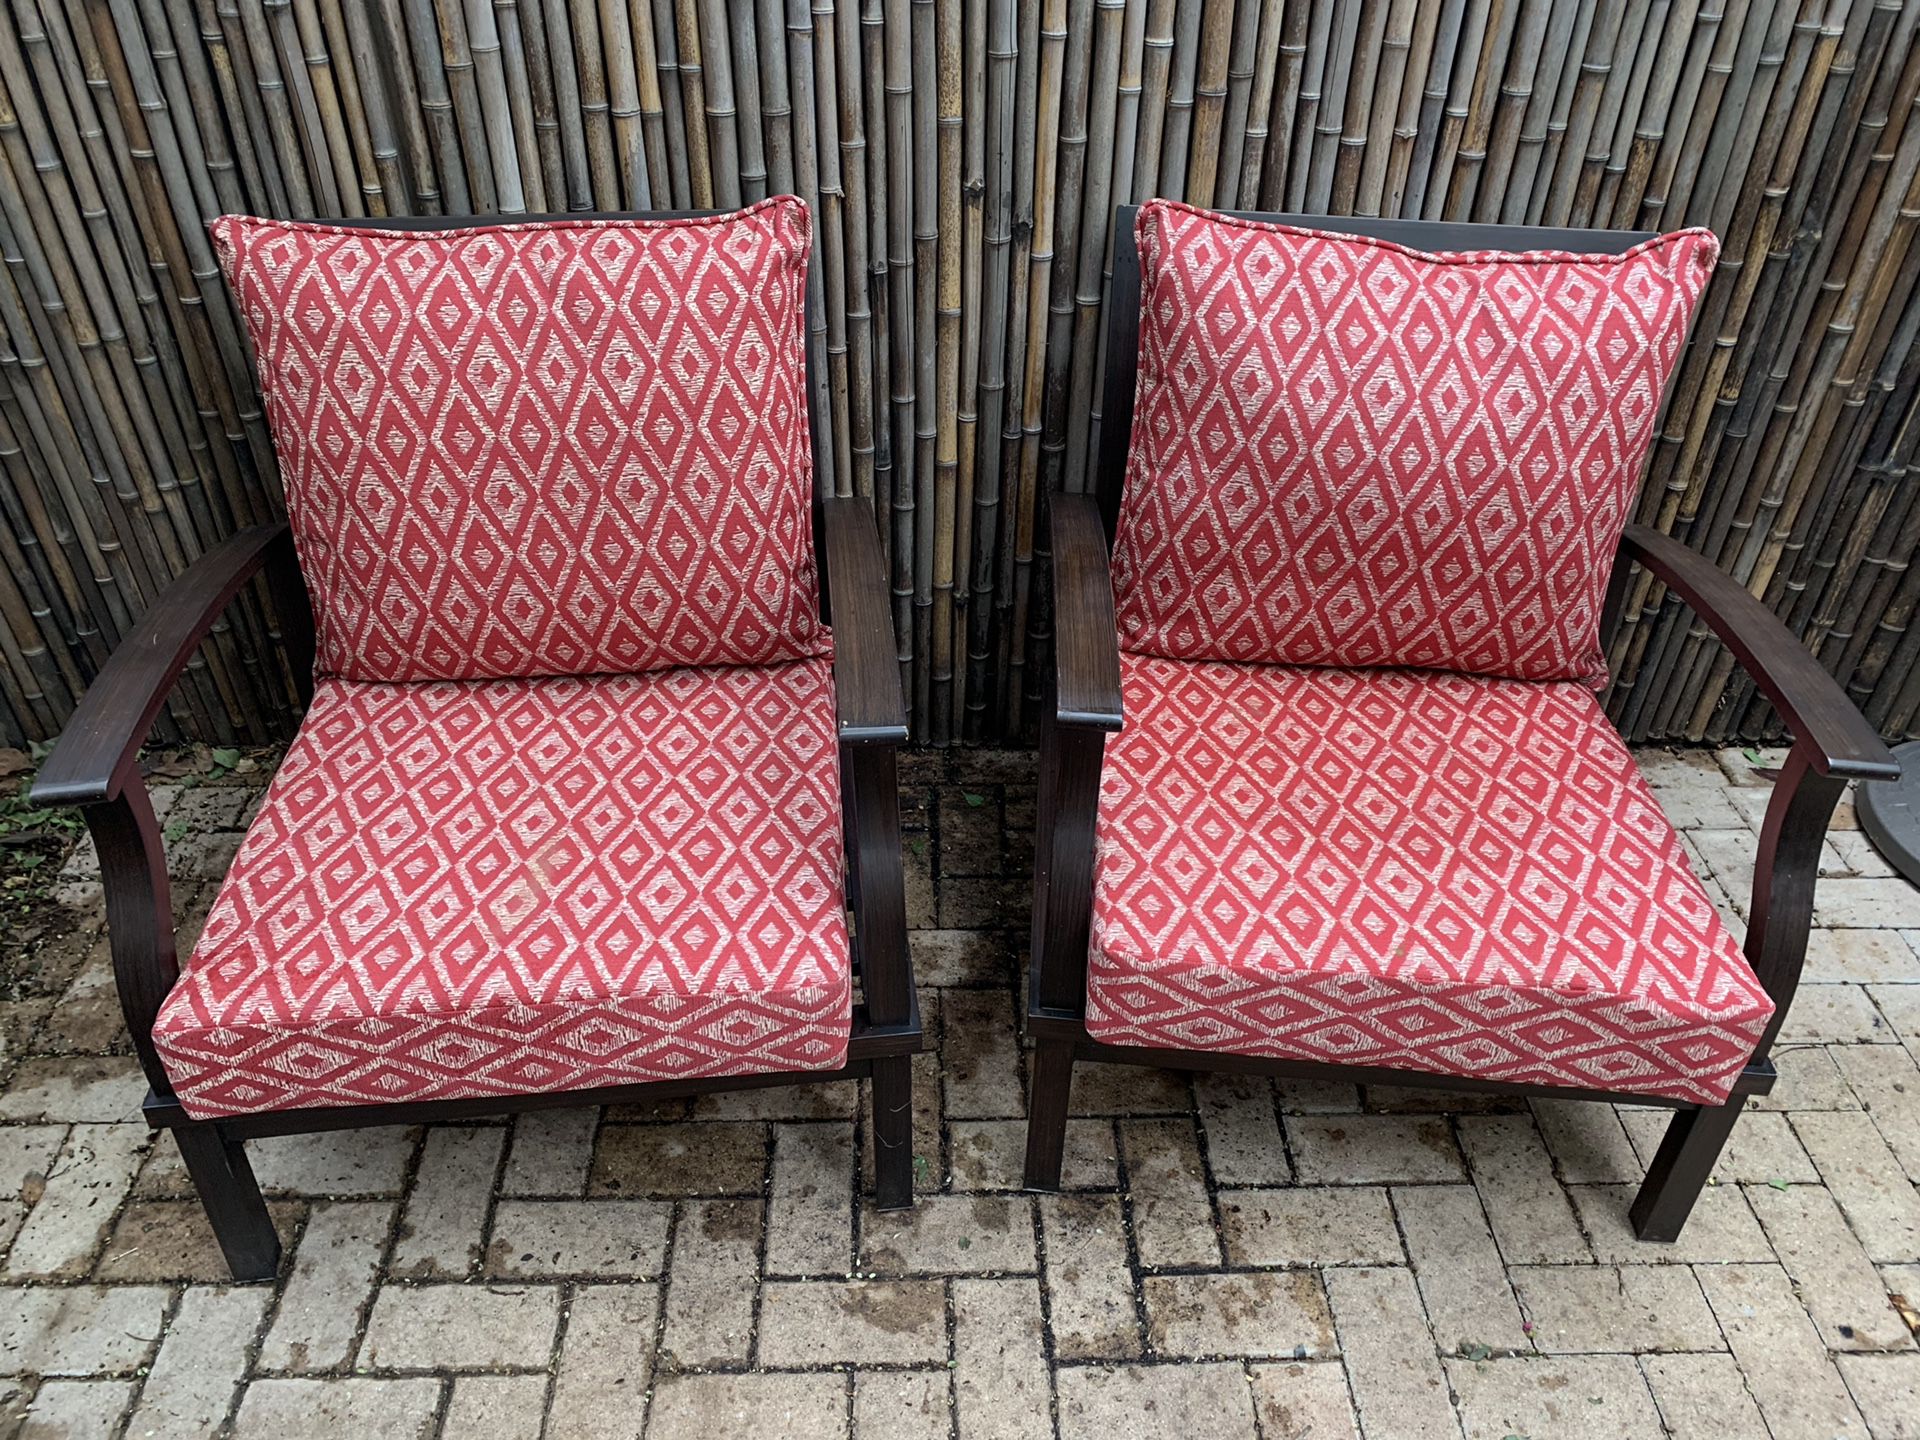 Allen + Roth “Gateway” Patio Chairs with Ottomans